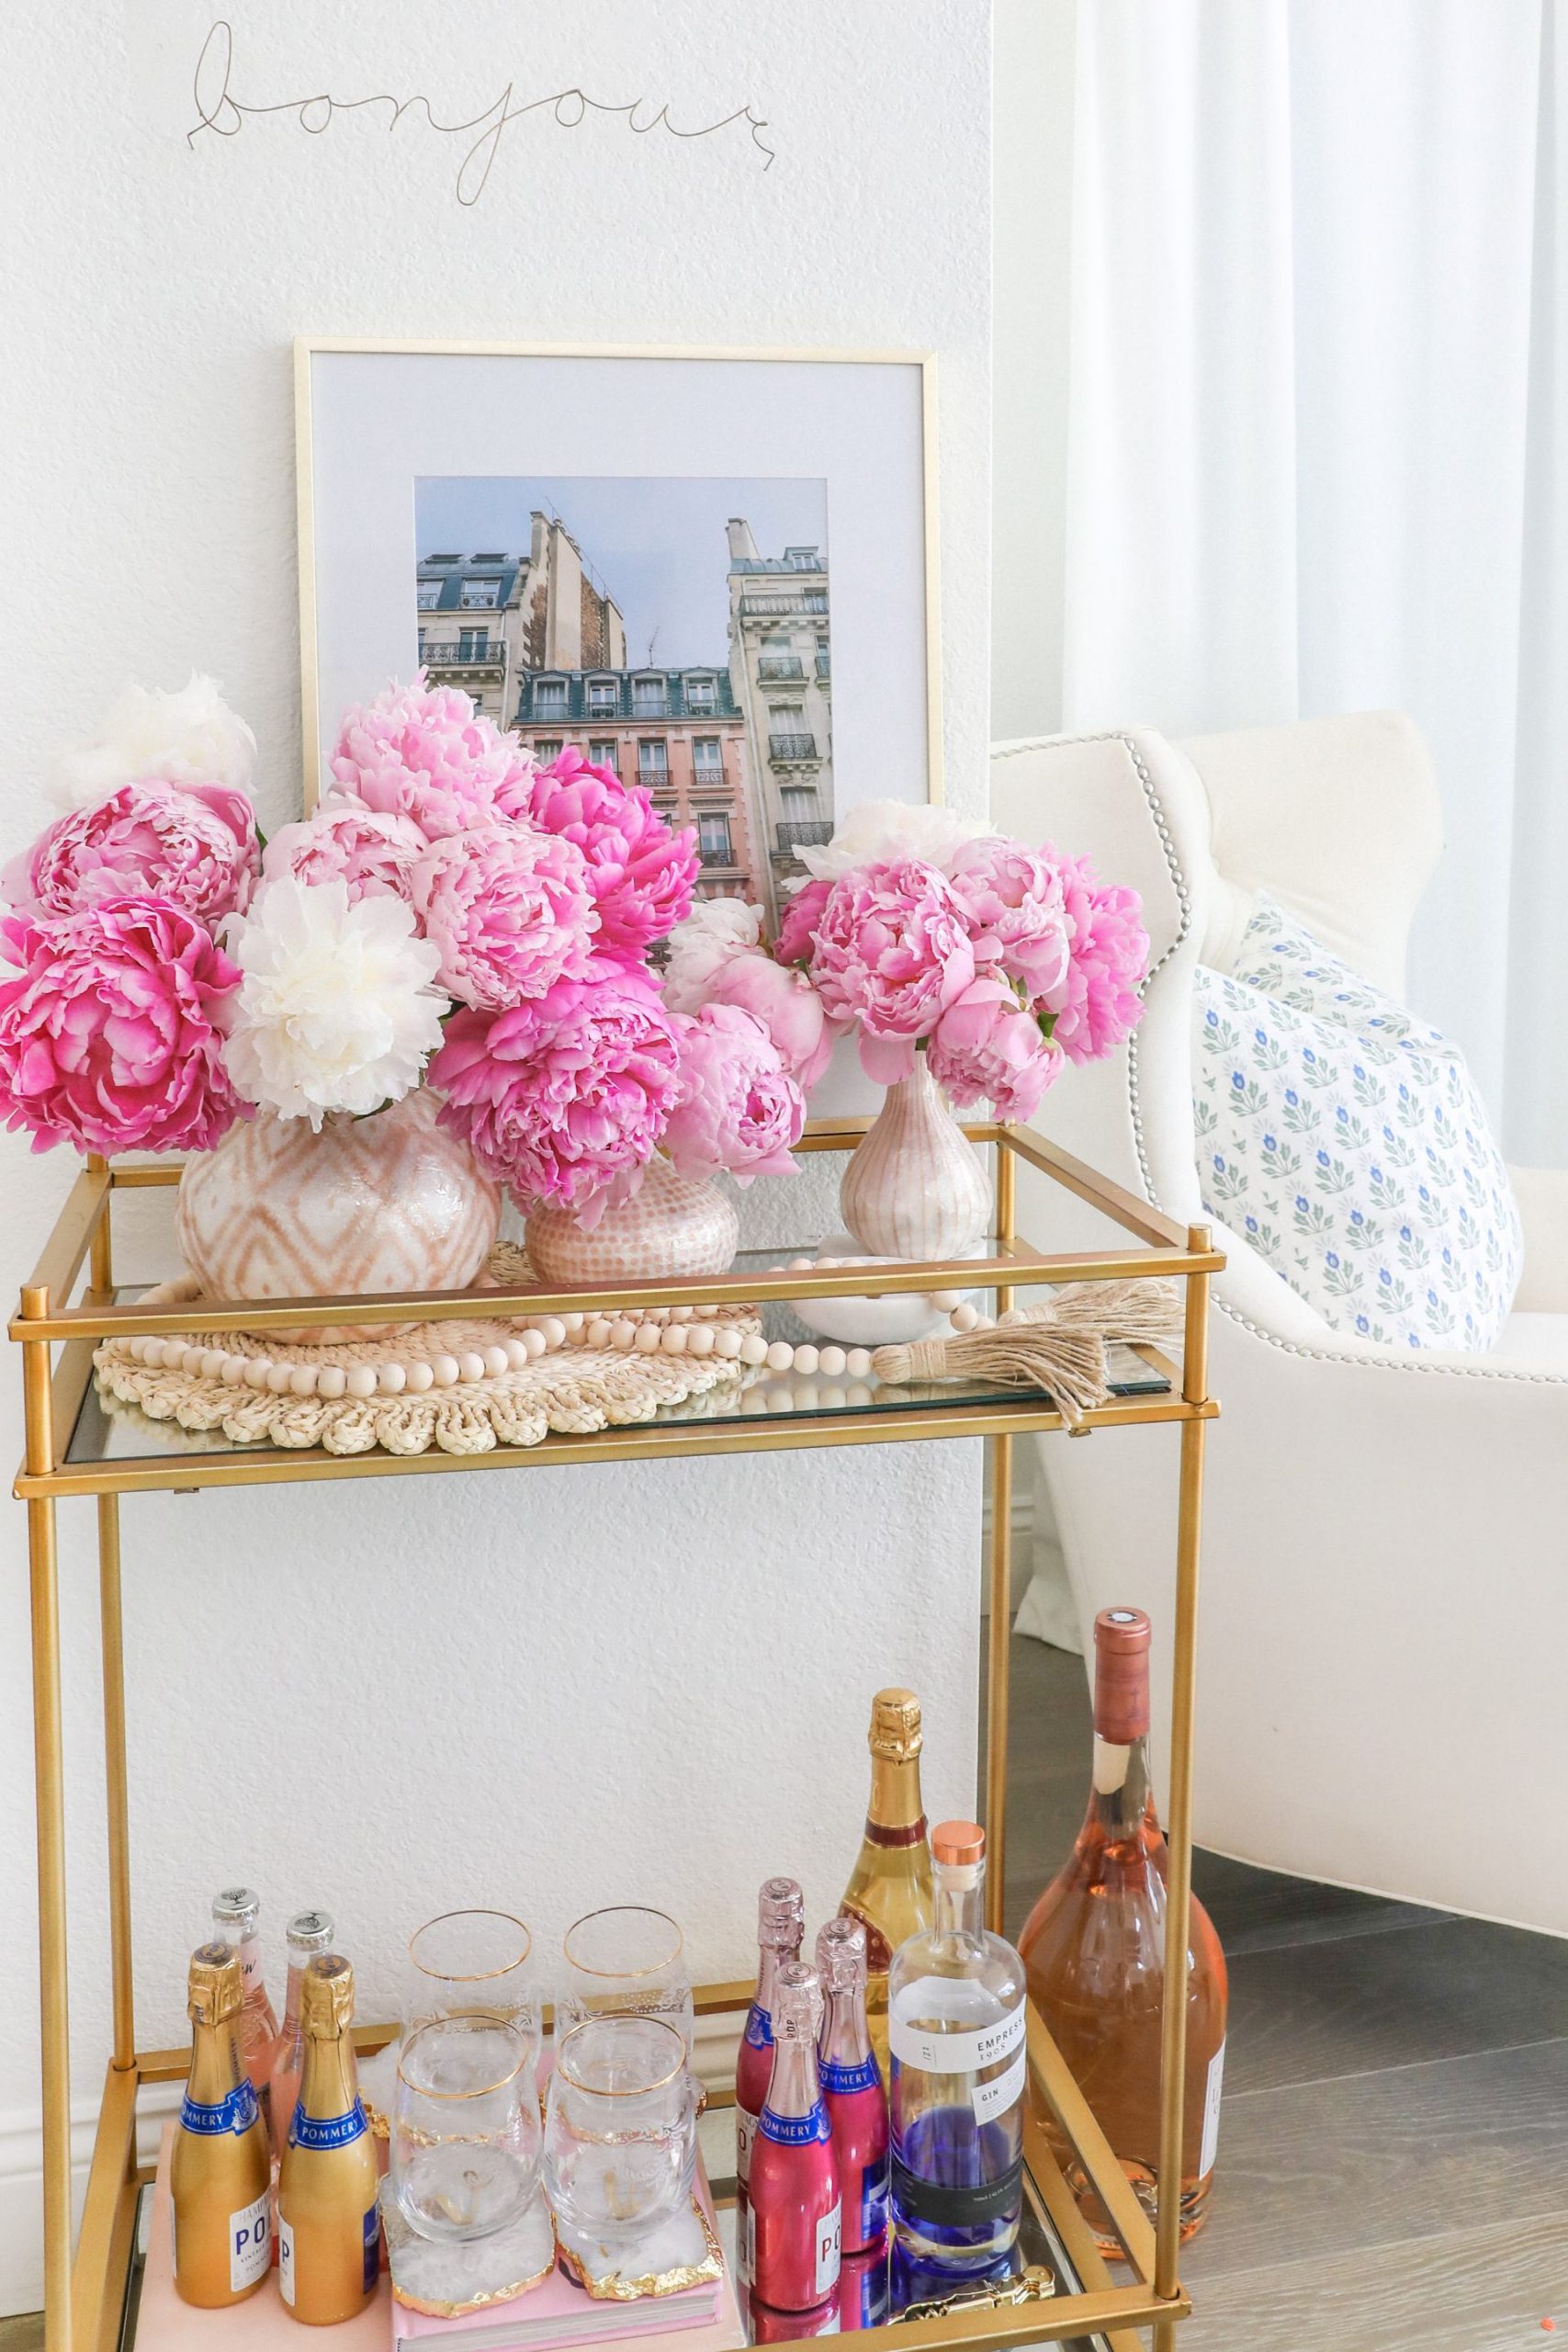 How to make peonies last longer, featured by San Francisco style blogger Lombard and Fifth.